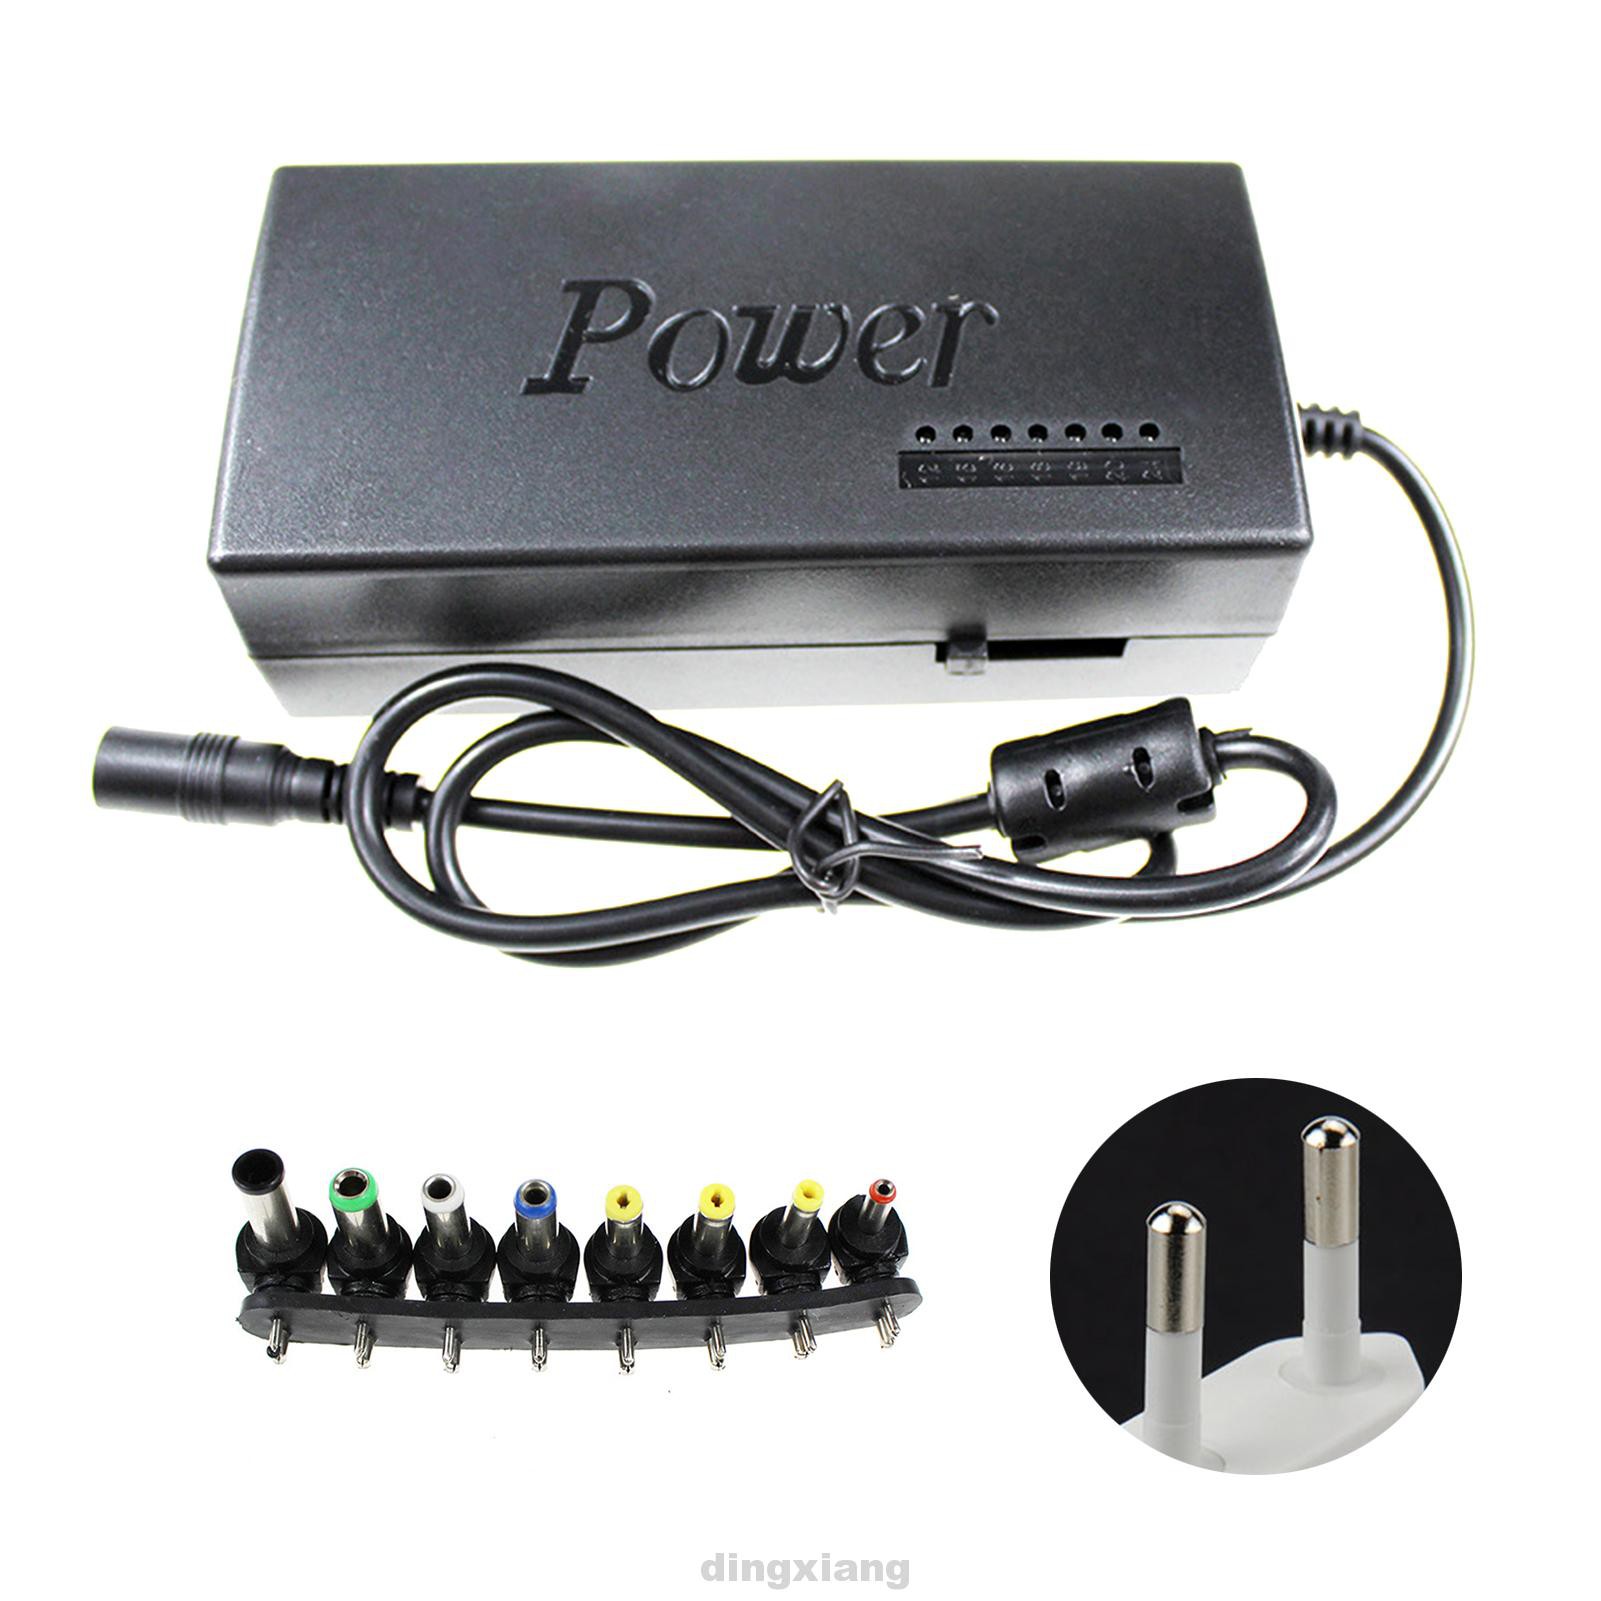 Power Supply Compact Portable Stable Home Office Easy Operate 8 Detachable Plugs Laptop Adapter